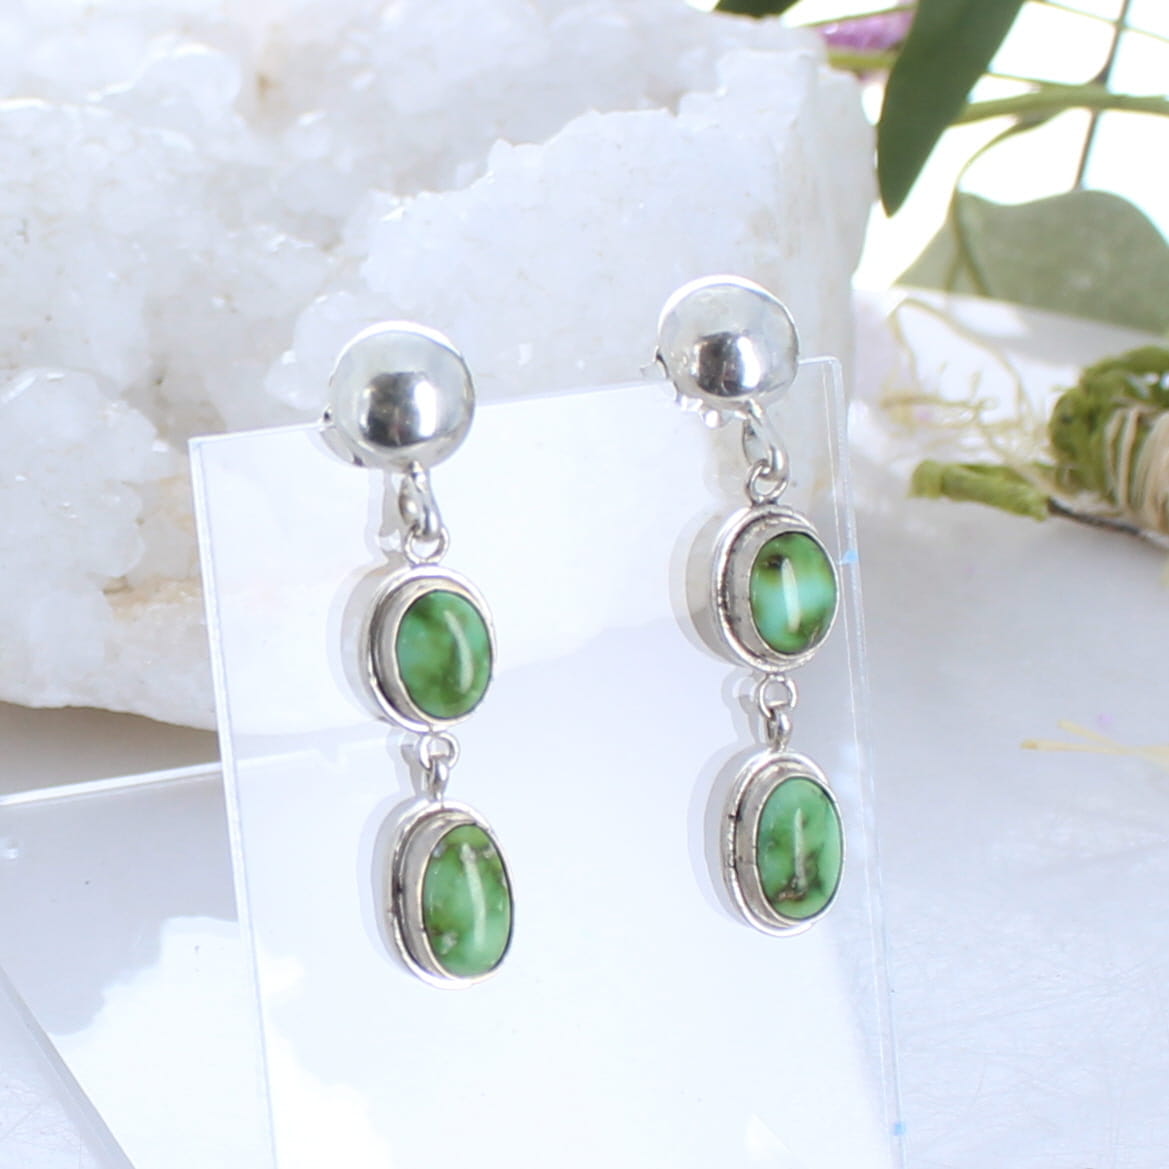 Sonoran Gold Turquoise Earrings 2 Stone Green Sterling Silver Drops -NewWorldGems